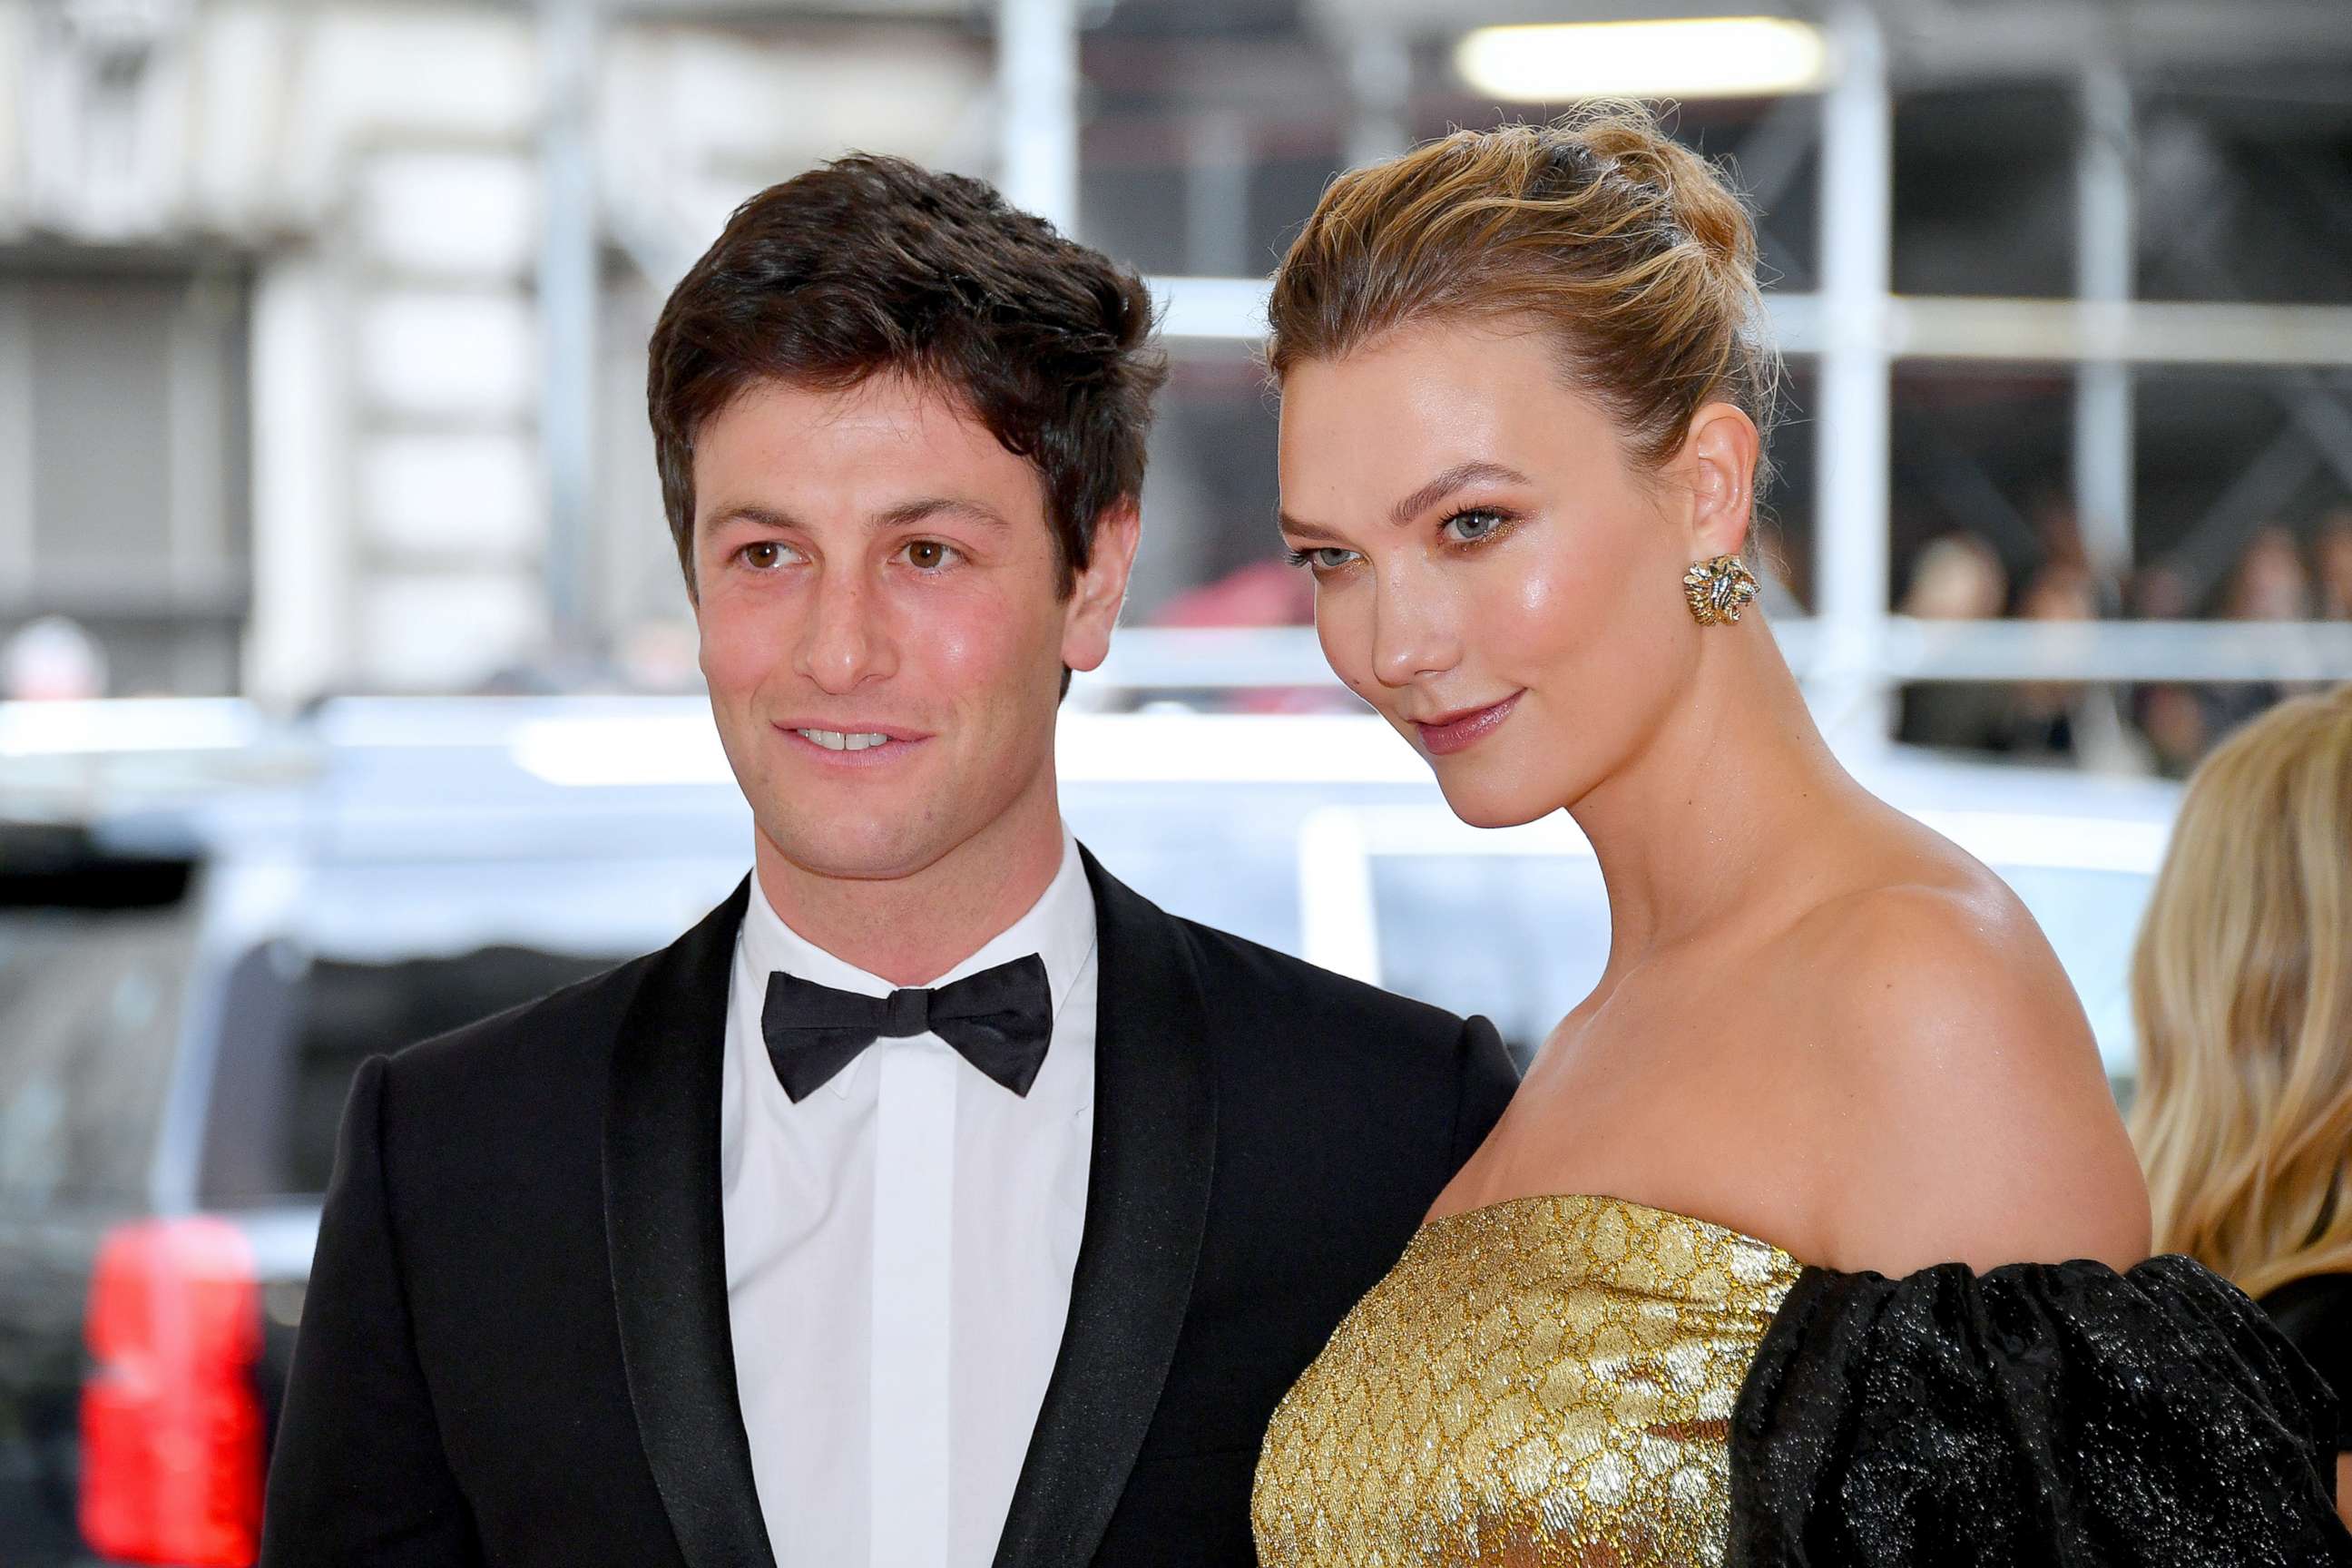 PHOTO: Joshua Kushner and Karlie Kloss attend The 2019 Met Gala Celebrating Camp: Notes on Fashion at Metropolitan Museum of Art on May 06, 2019, in New York.